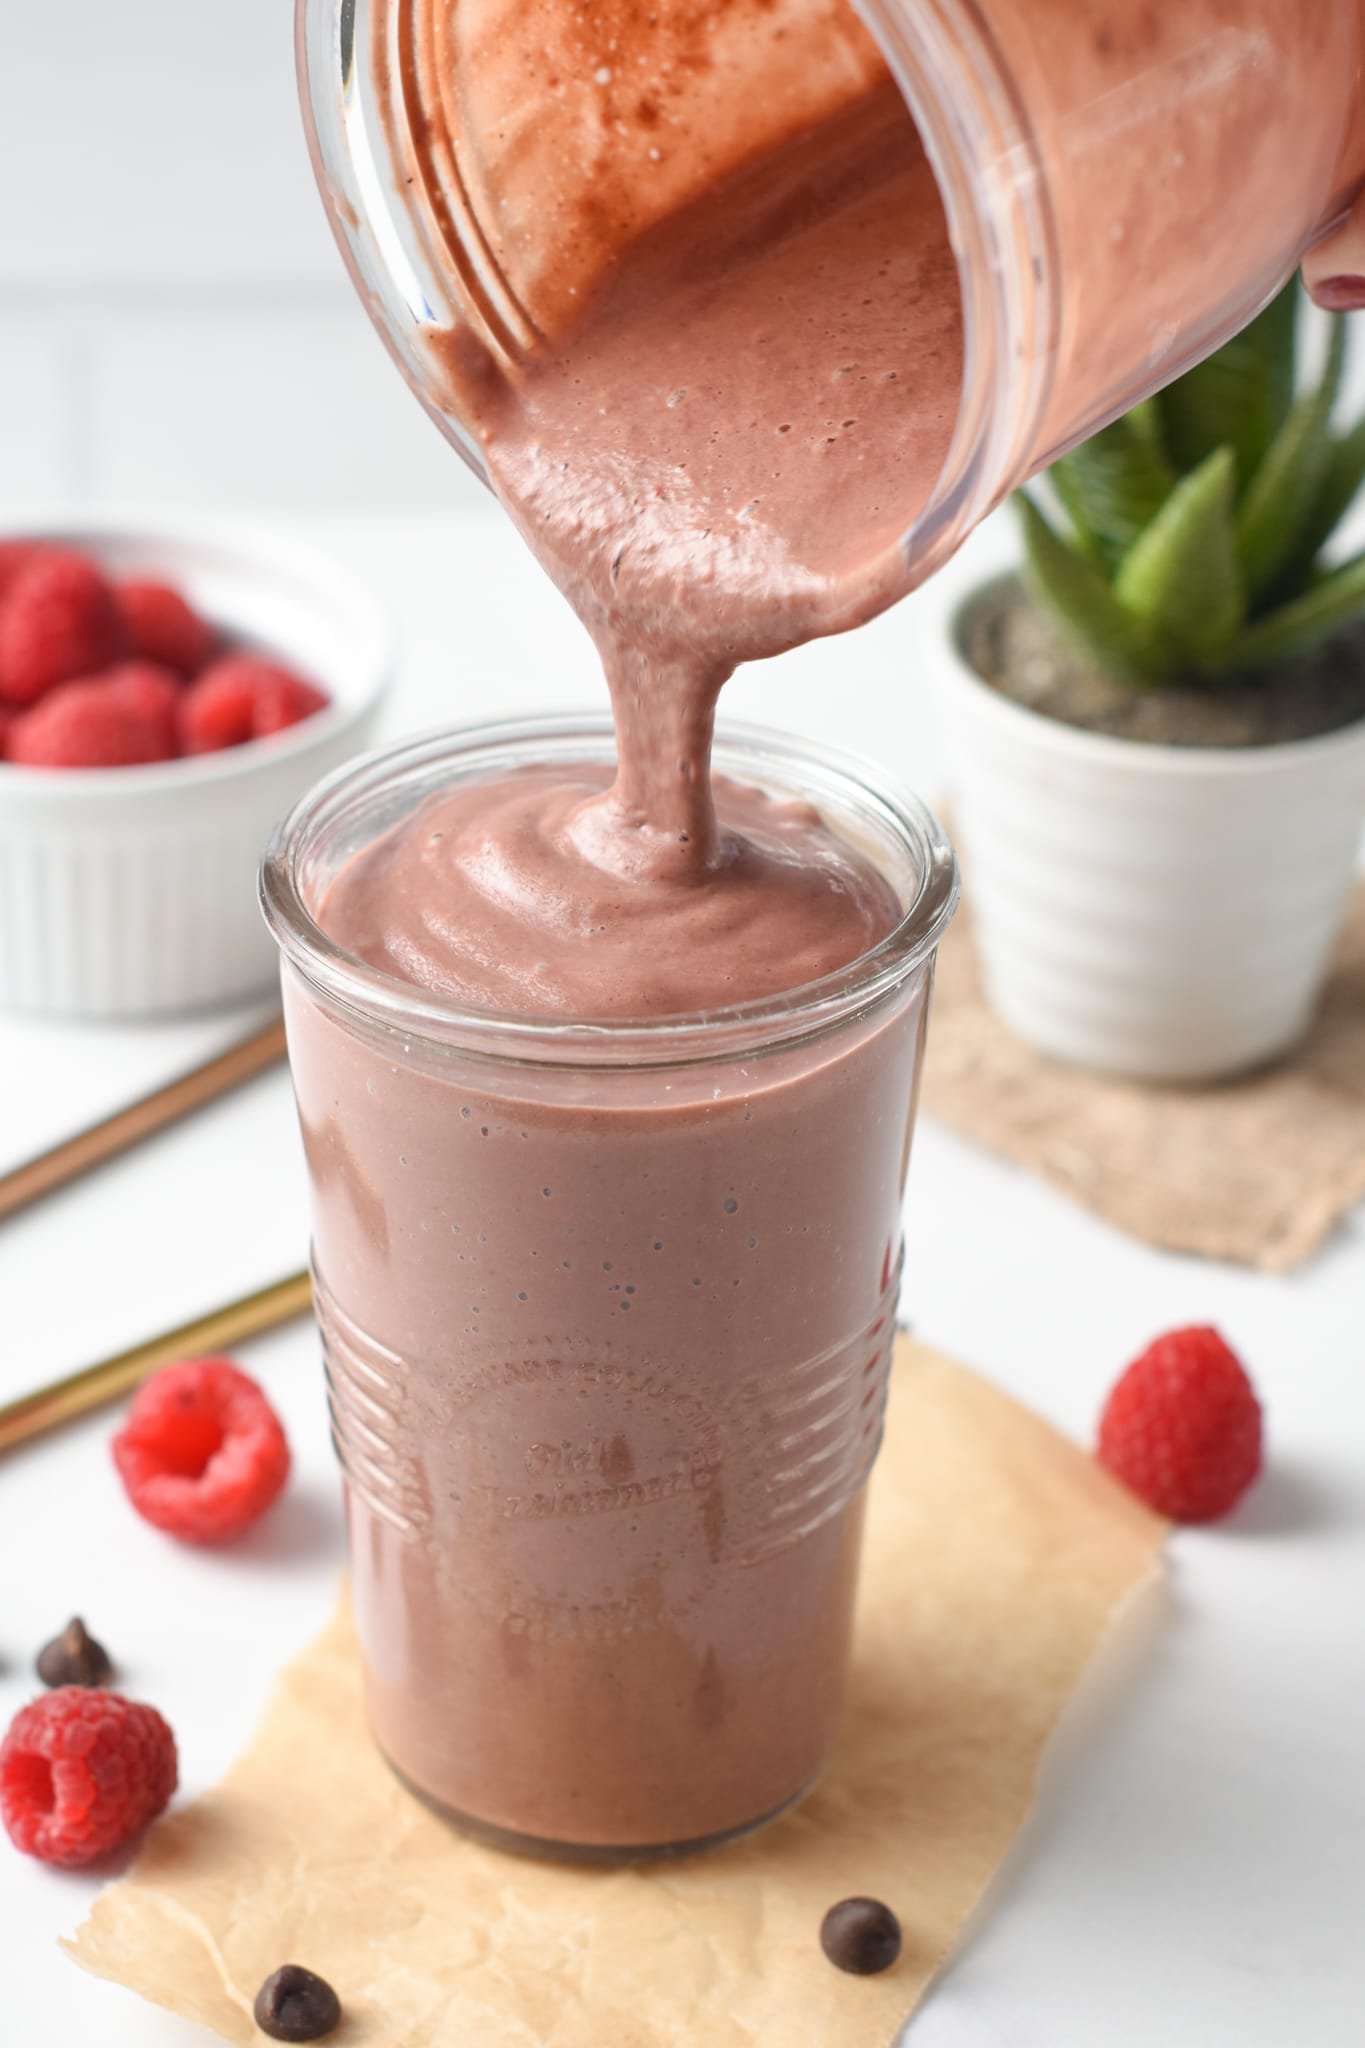 A thick, creamy, and decadent Chocolate Raspberry Smoothie with fudgy chocolate texture and fruity raspberry flavors.